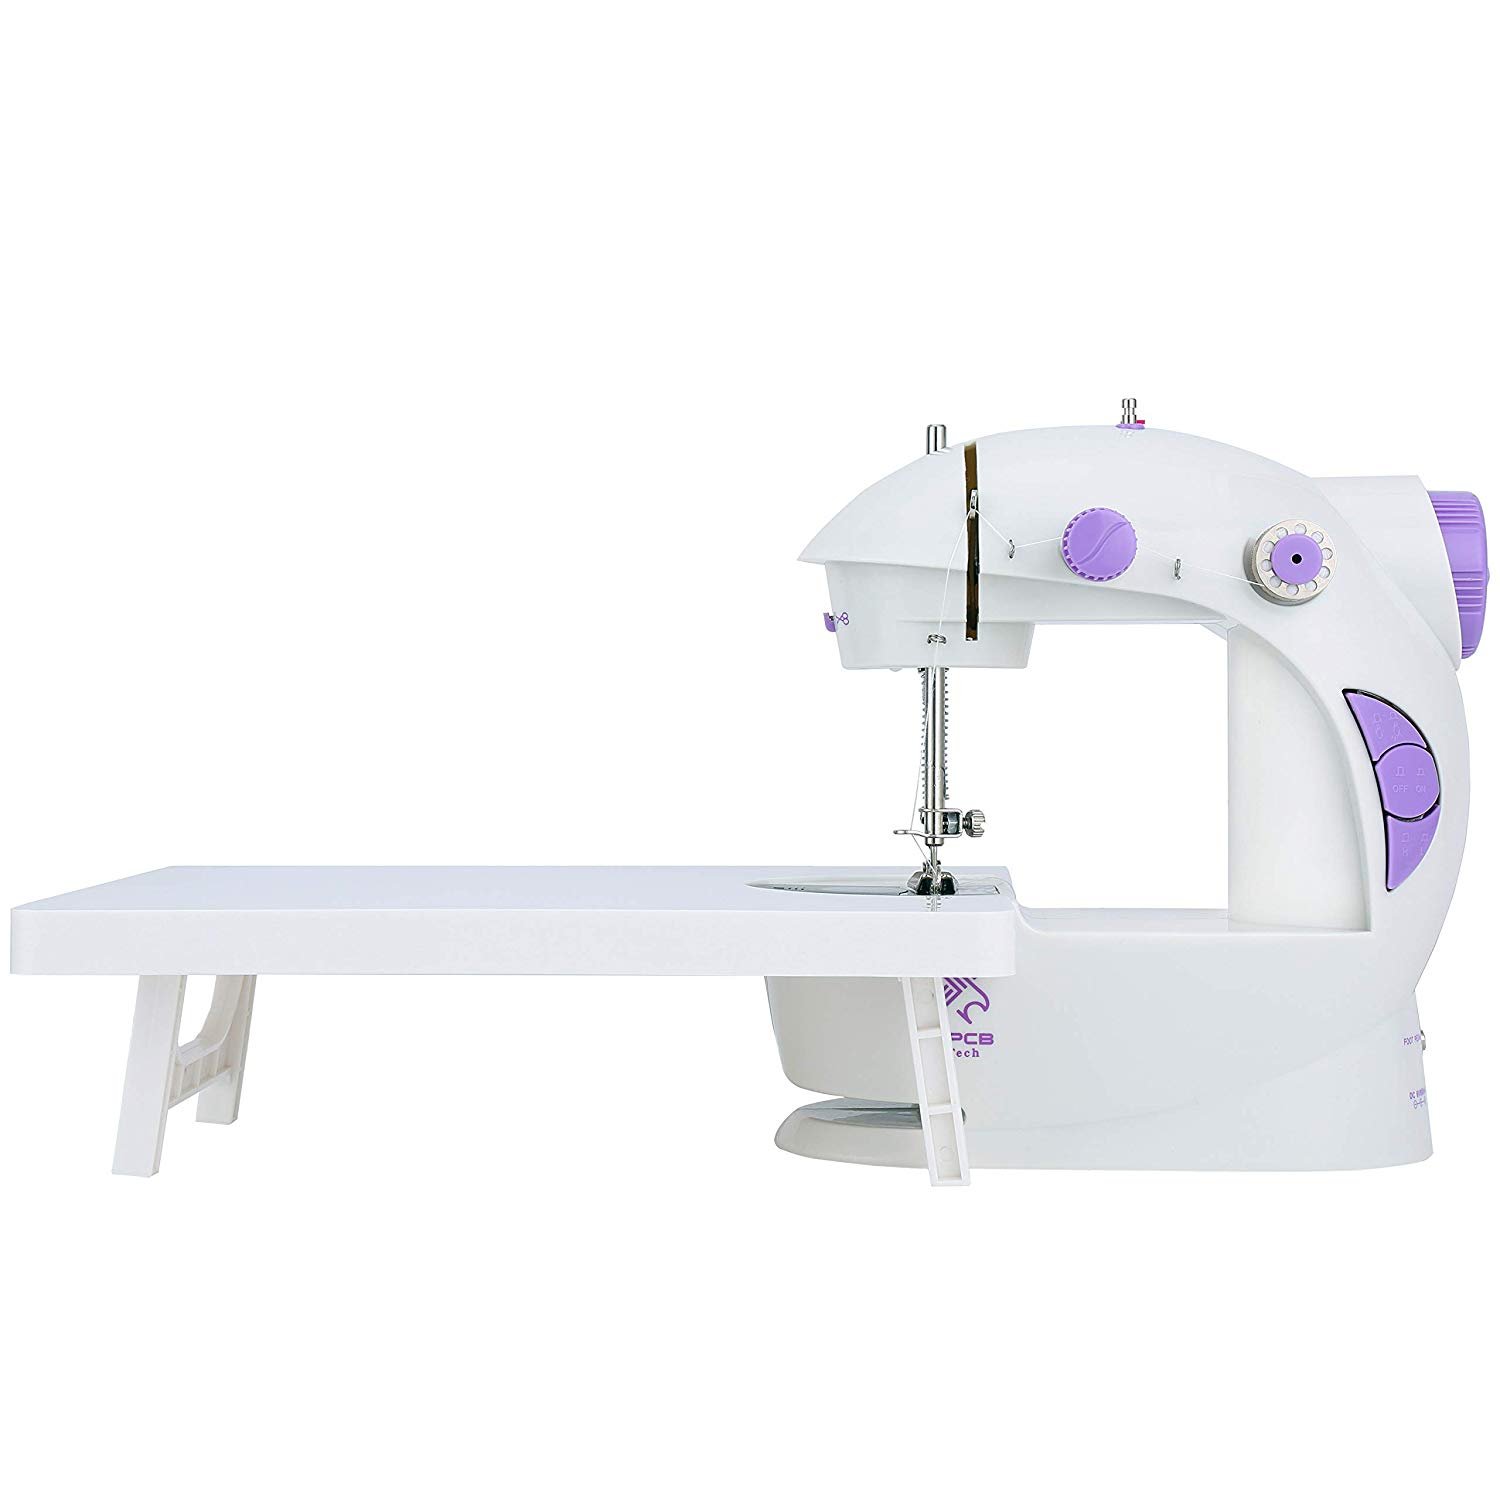 Mini sewing machine with table